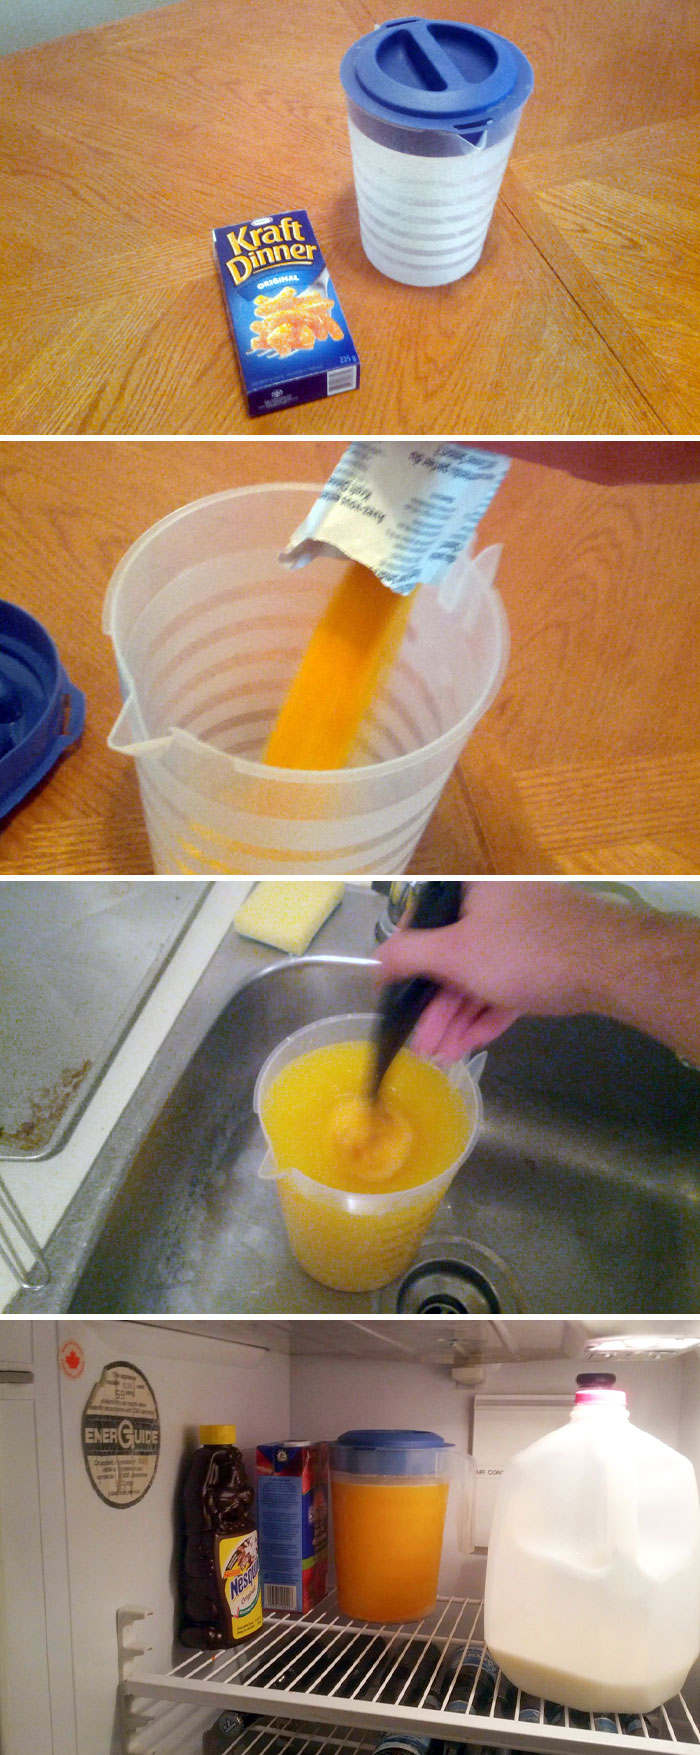 For April Fools Day Get Your "Orange Juice" Ready